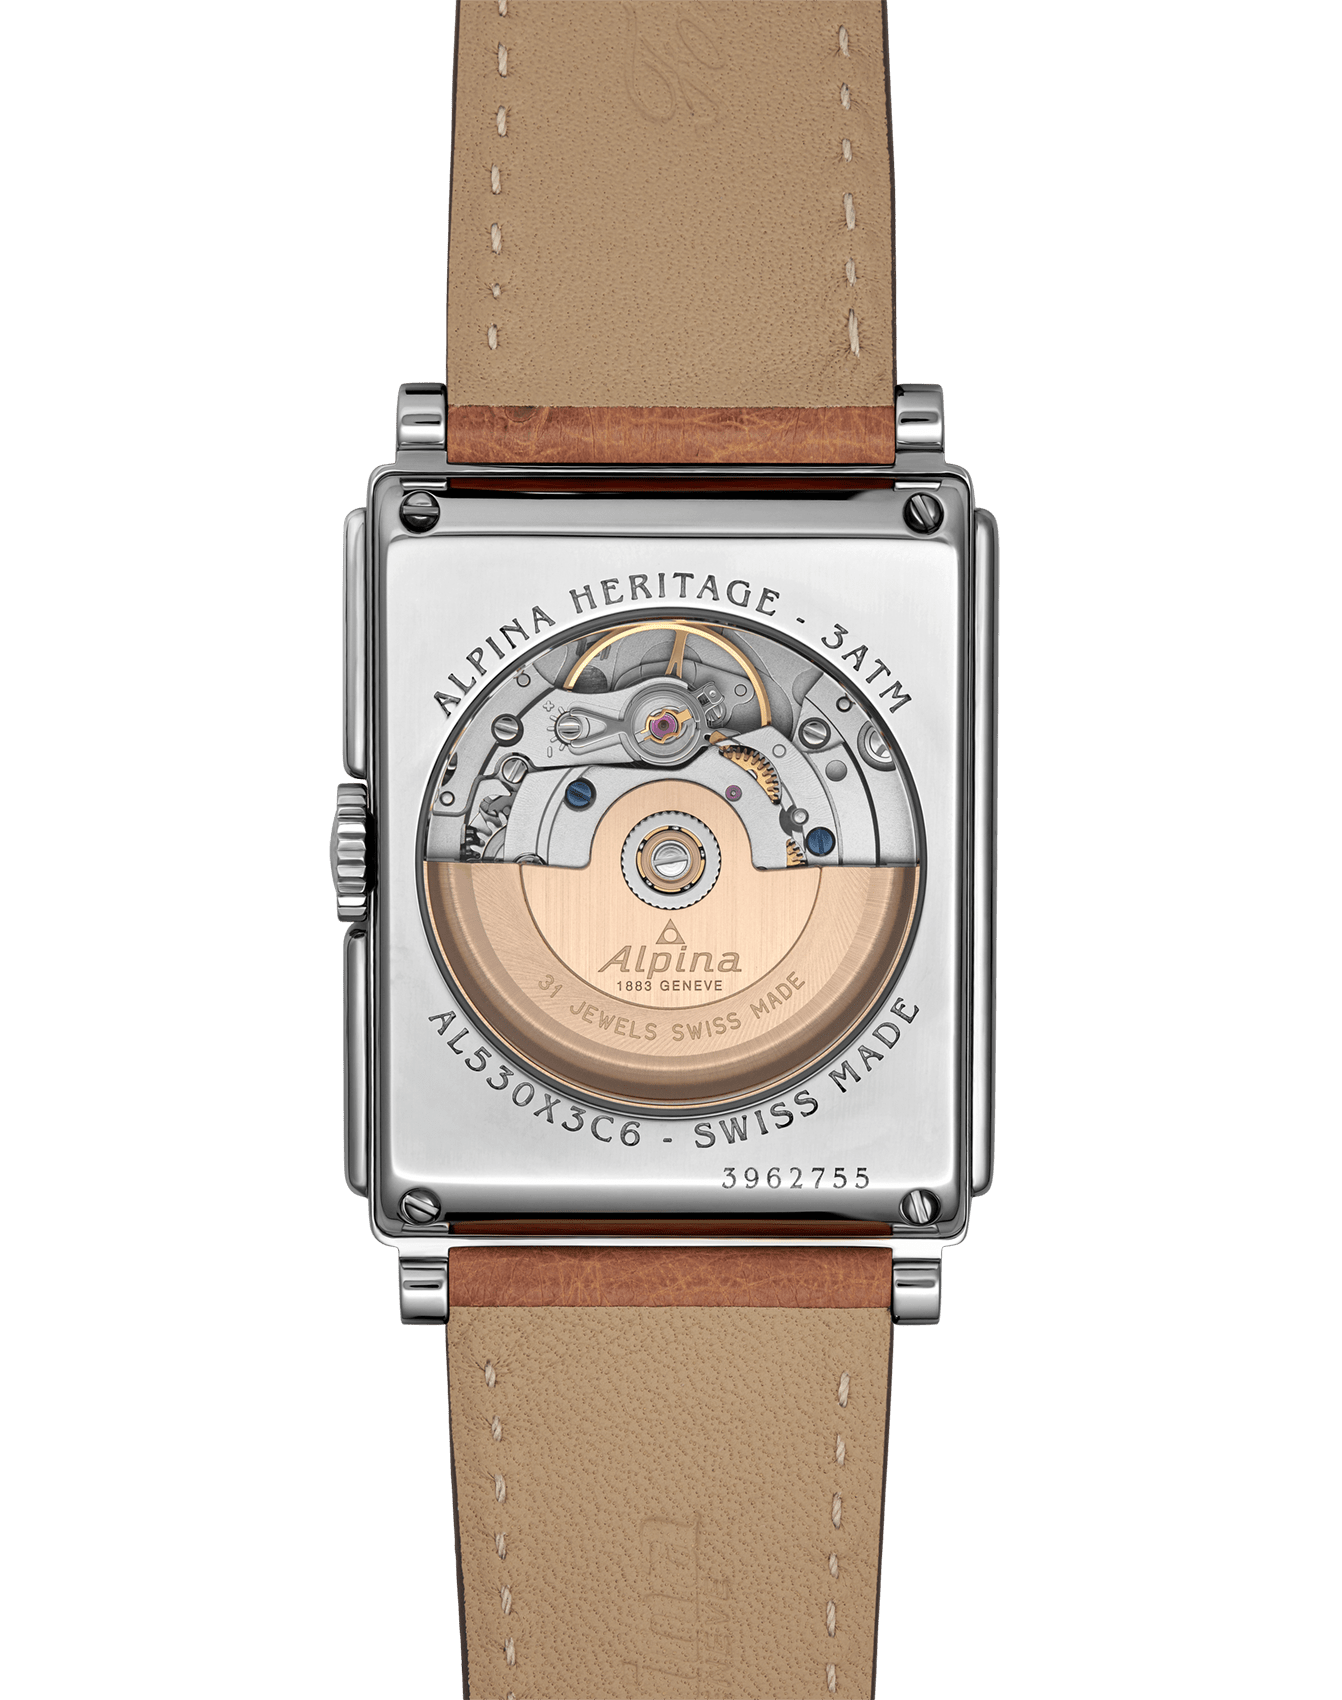 Alpiner Heritage Carrée Automatic 140 Years - Alpina Watches